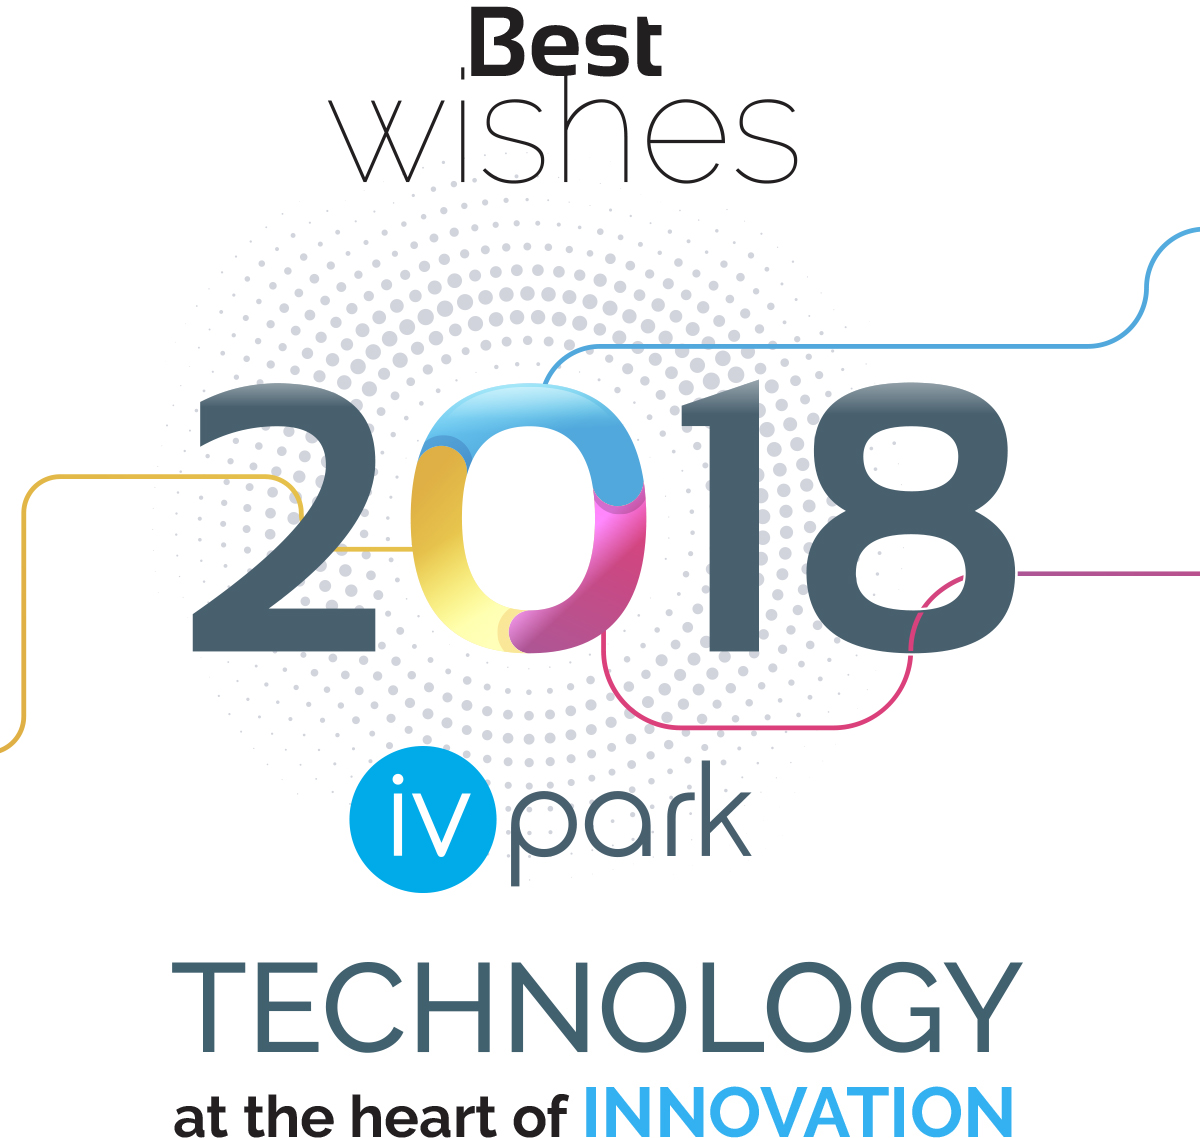 Best Wishes 2018 - IVPark, technologie at the hearth of innovation